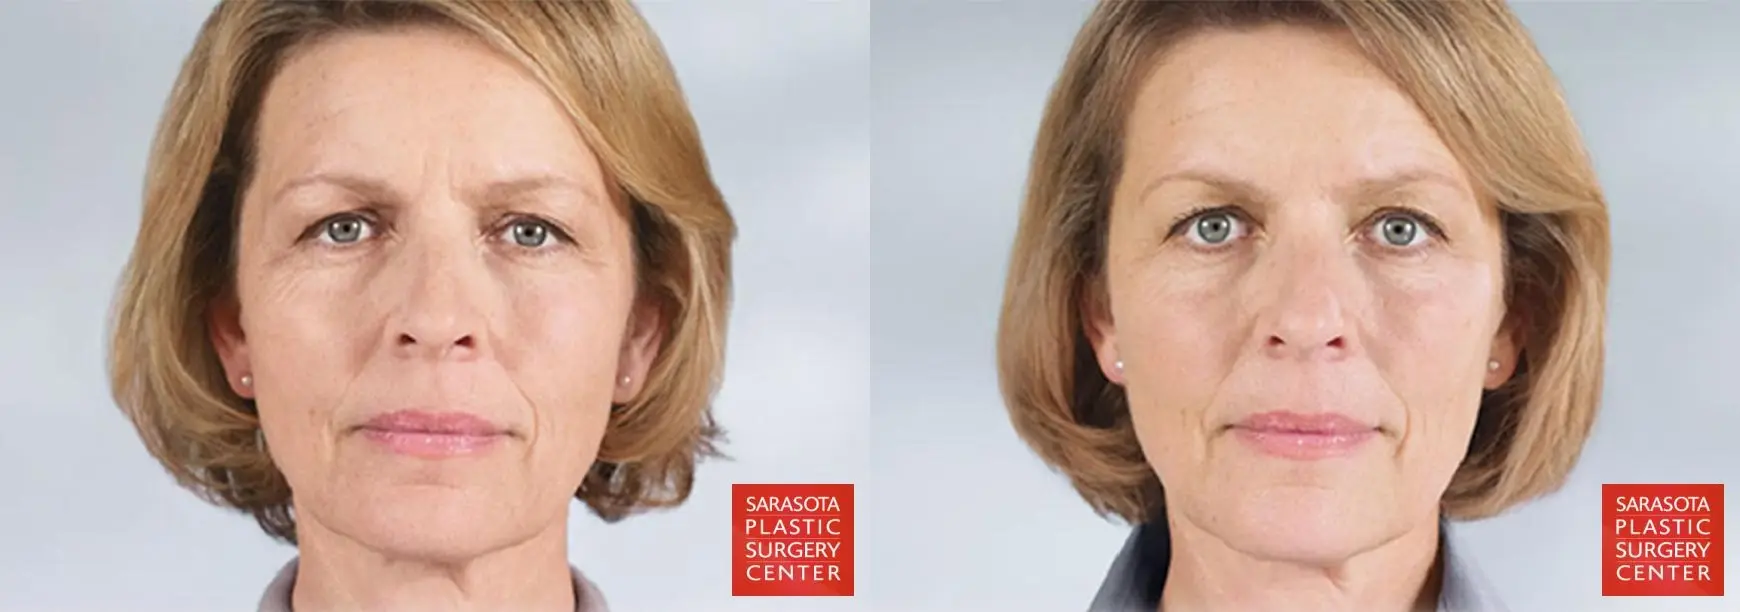 Sculptra®: Patient 1 - Before and After  